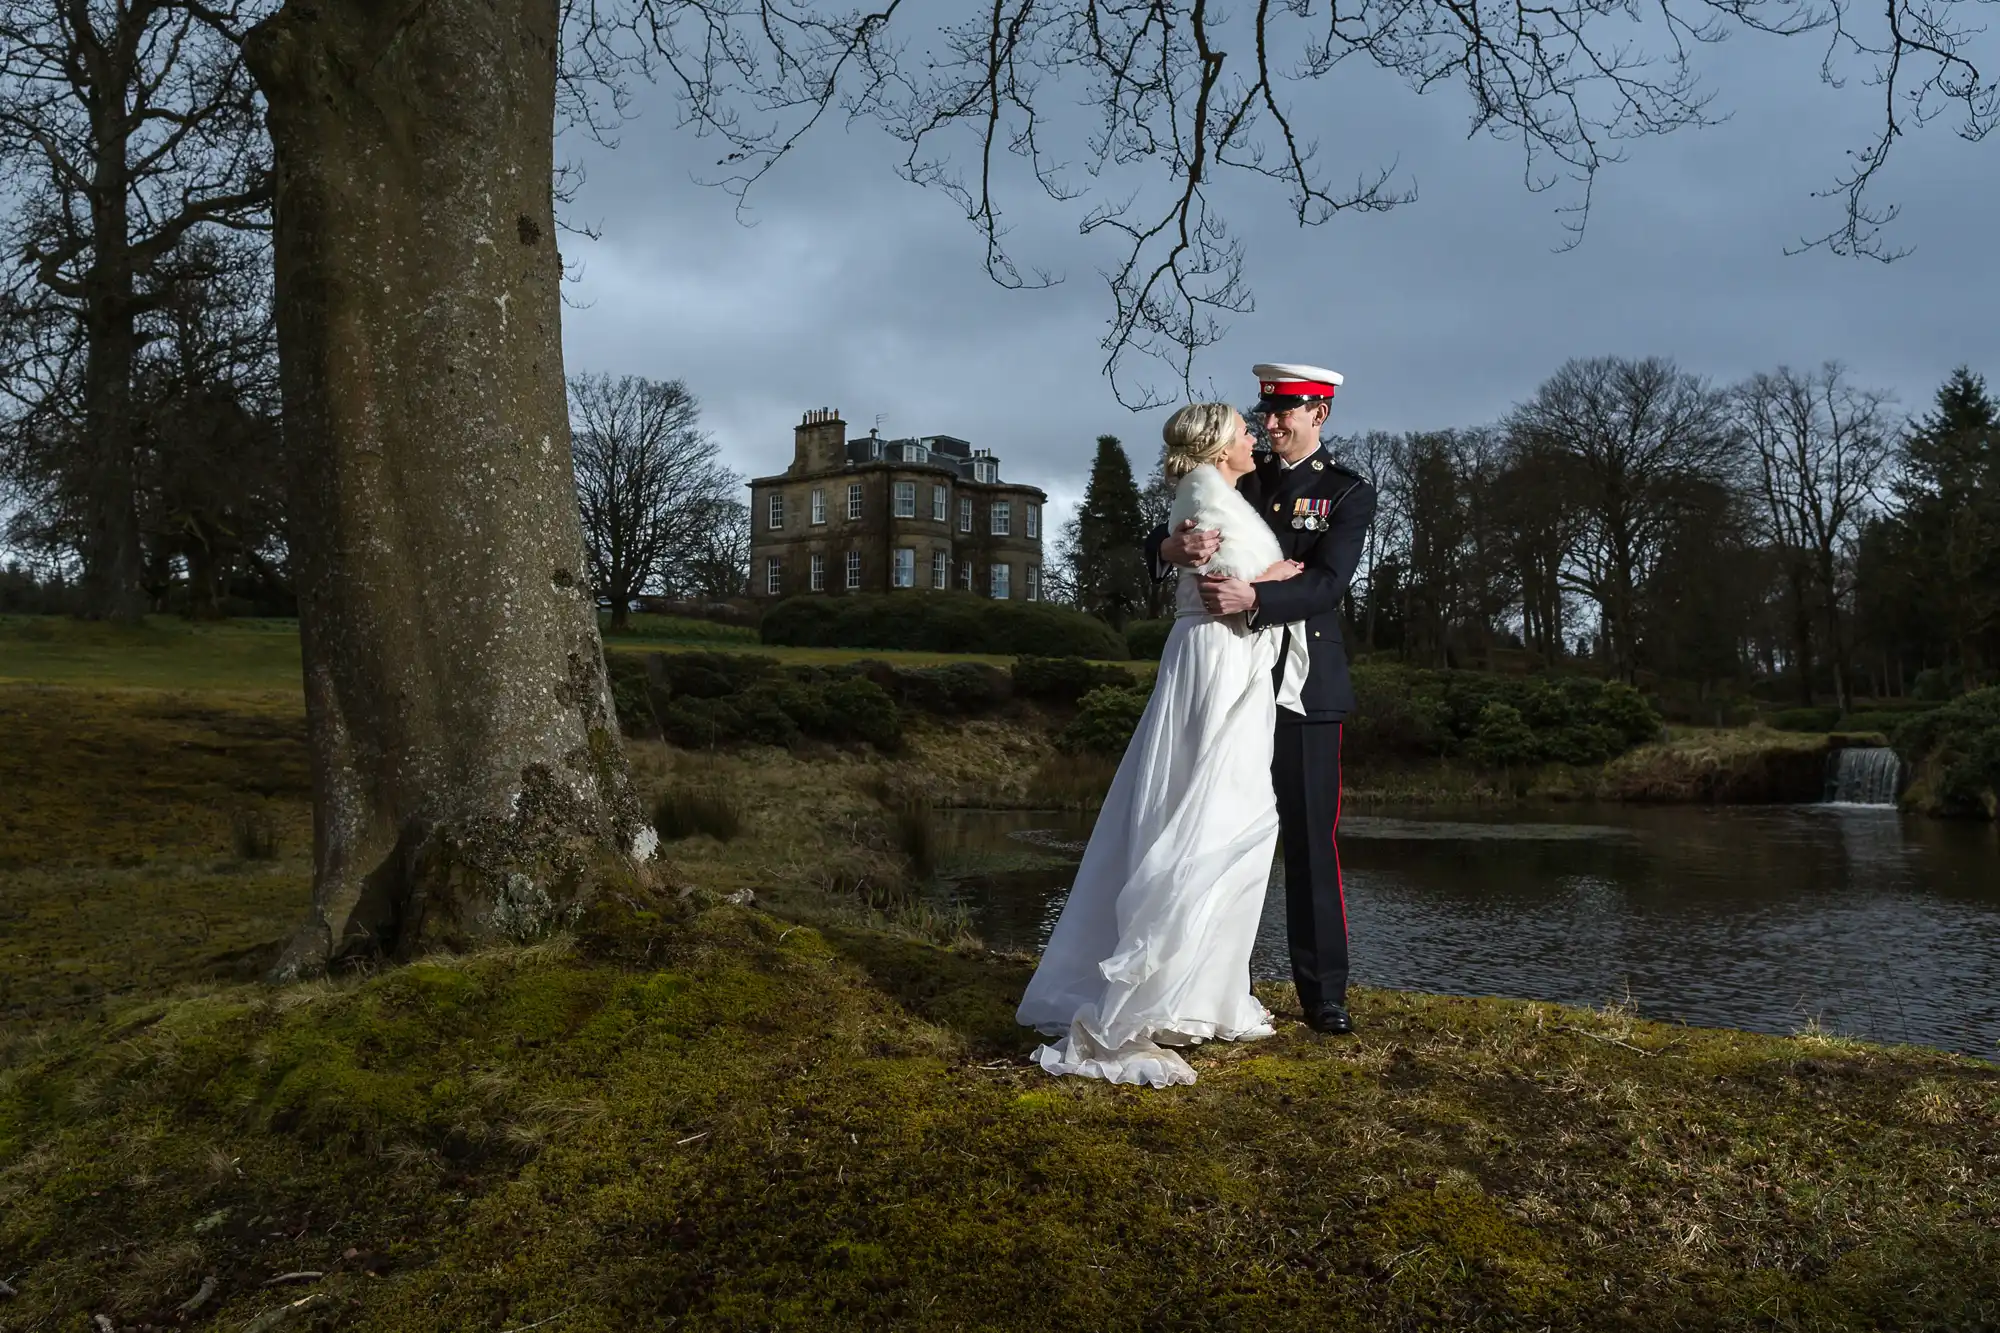 Bride in a white dress and groom in a military uniform embracing under a tree by a pond, with a historic building and bare trees in the background.